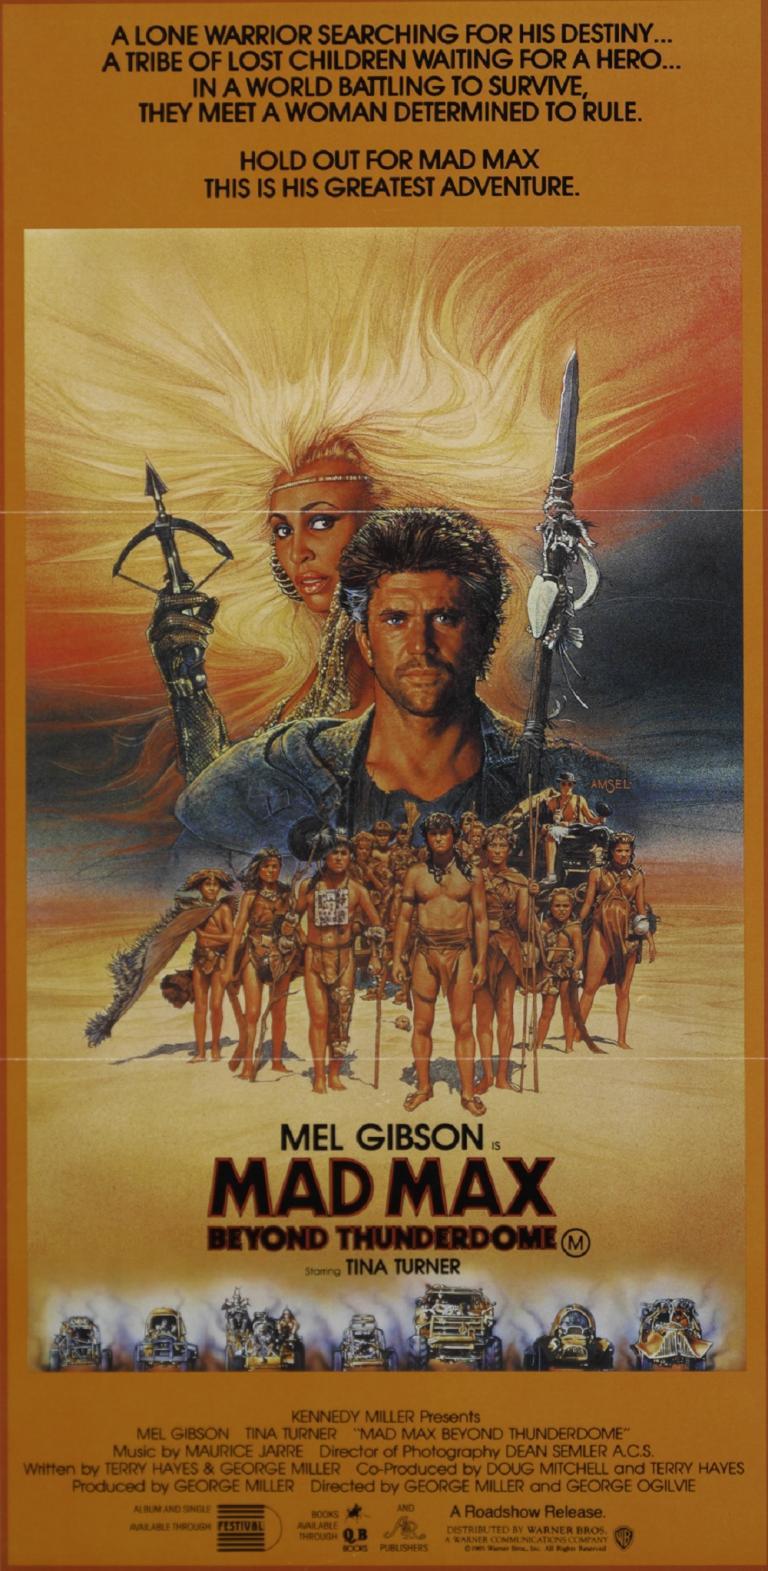 Poster featuring Mel Gibson and Tina Turner, with cast. Text reads: 'A lone warrior searching for his destiny...A tribe of lost children waiting for a hero...In a world battling to survive, they meet a woman determined to rule. 